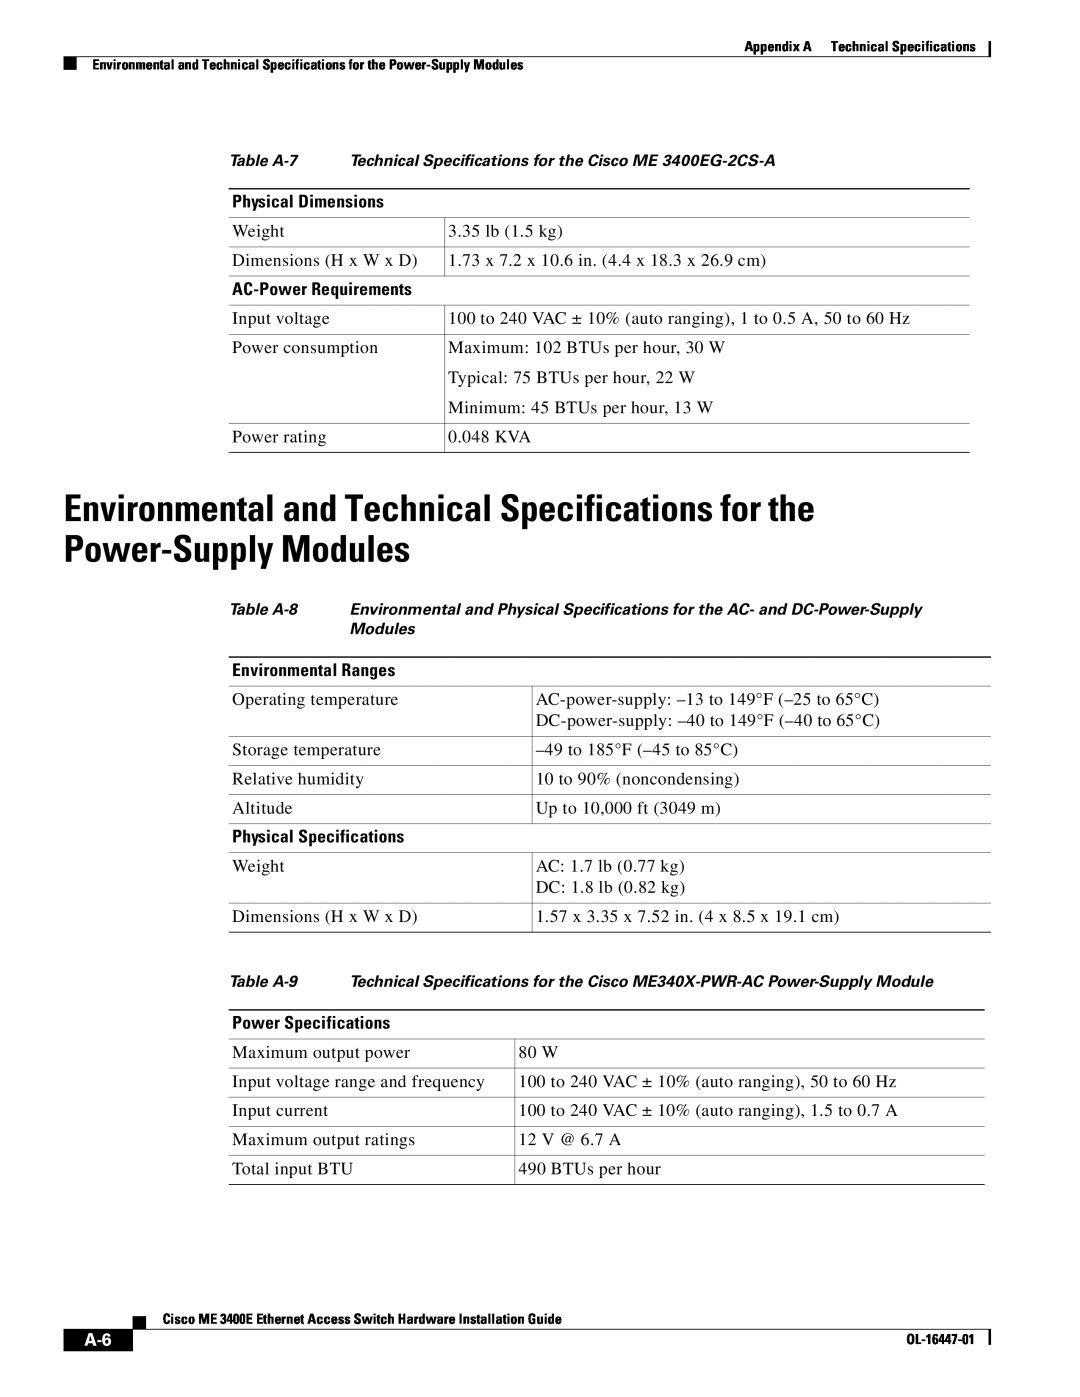 Cisco Systems OL-16447-01 manual Table A-7 Technical Specifications for the Cisco ME 3400EG-2CS-A, Modules, Table A-9 